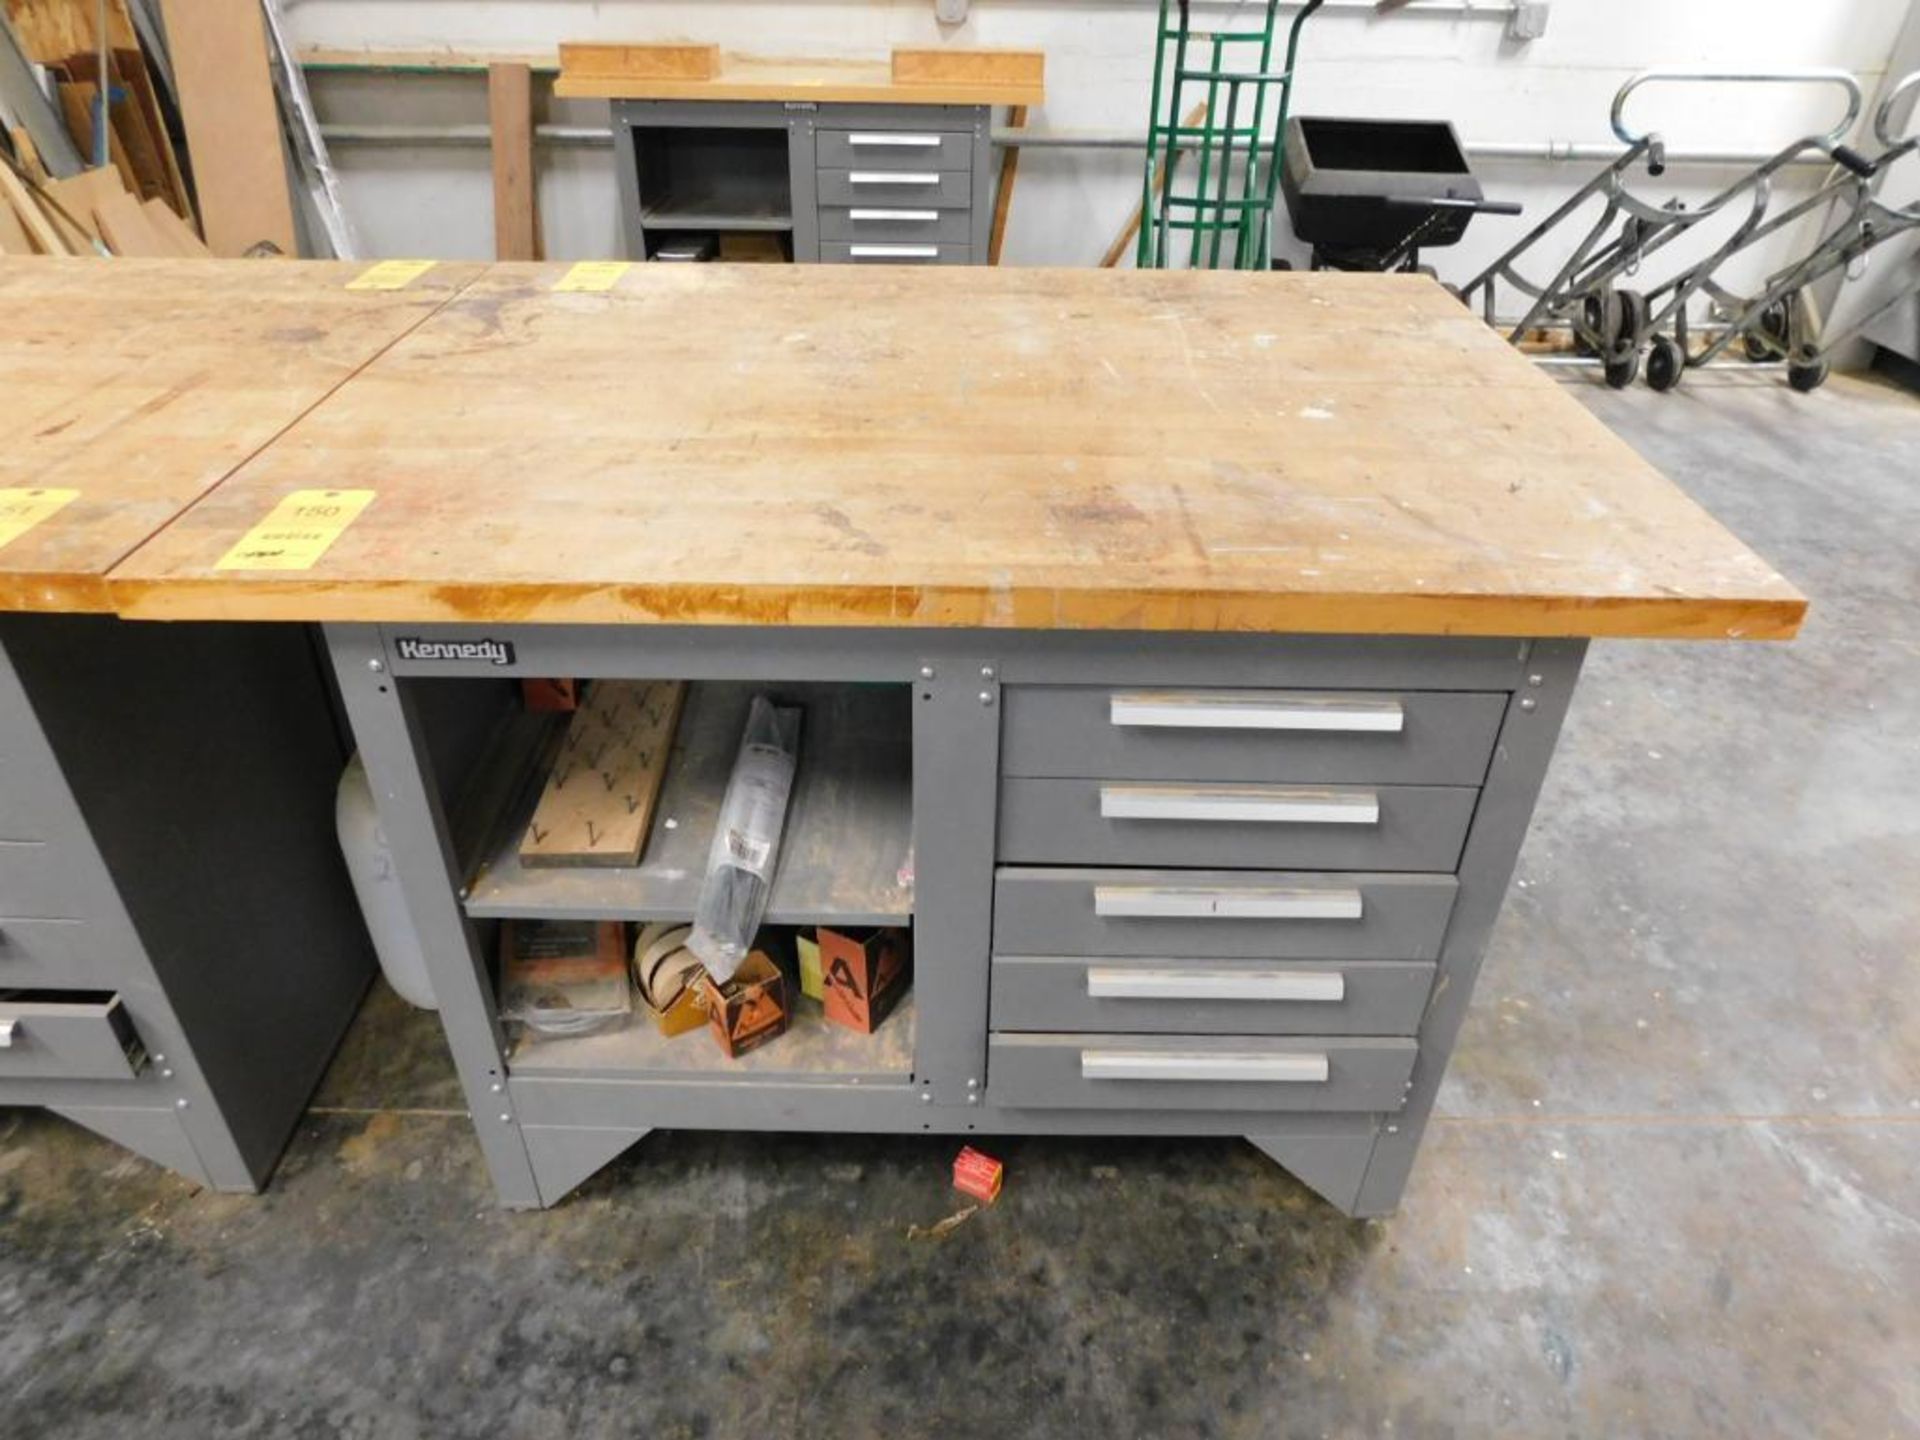 LOT: (2) Kennedy 54" x 20" Maple Top 5-Drawer Work Benches w/Contents of Wood Work Supplies (LOCATIO